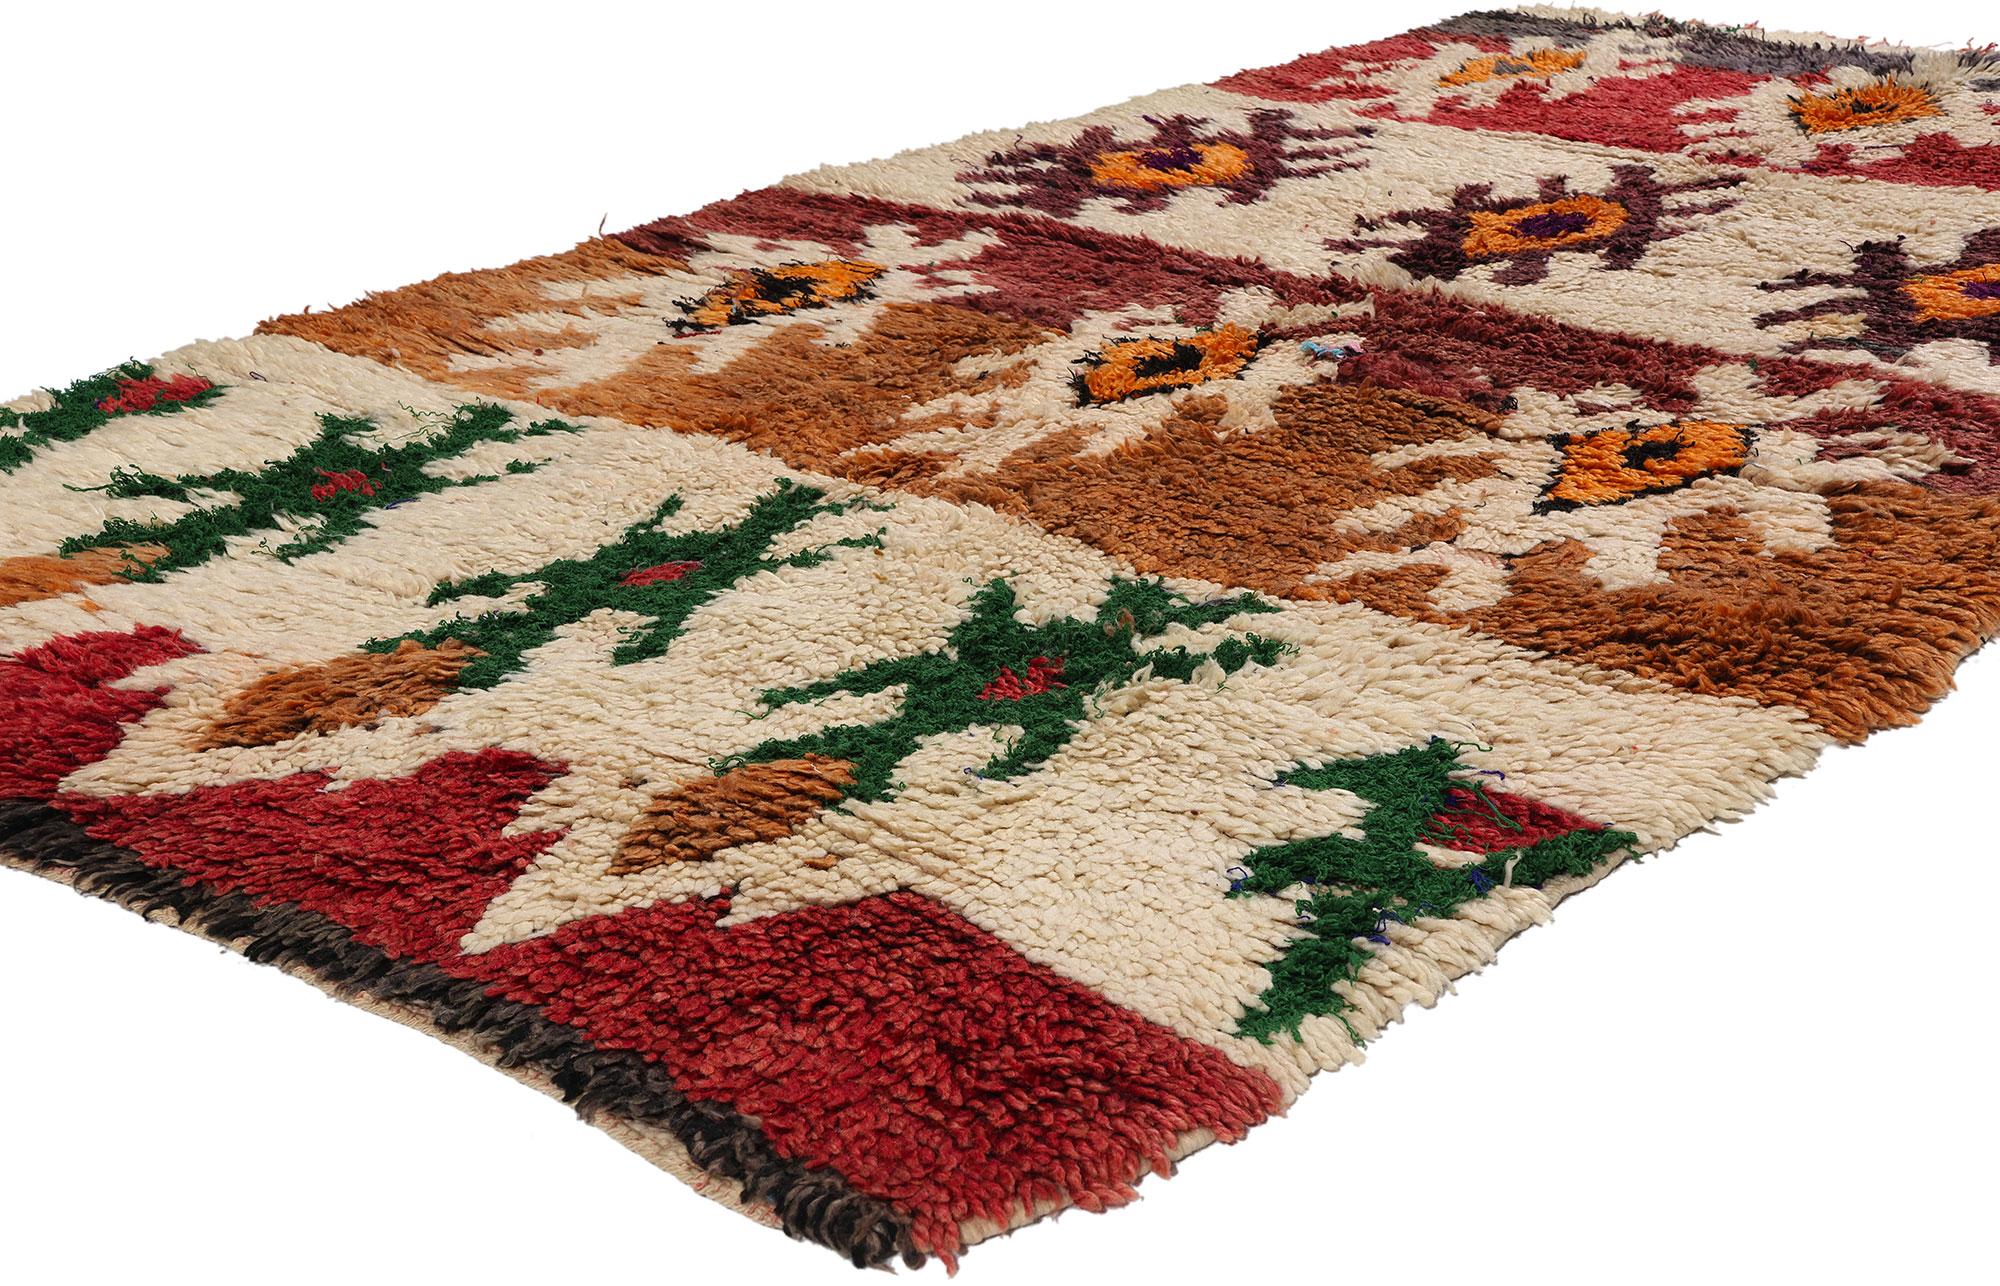 21753 Vintage Earth-Tone Moroccan Azilal Rug, 04'04 x 07'09. From the vibrant heart of central Morocco's provincial capital, nestled in the High Atlas Mountains, emerges the resplendent legacy of Azilal rugs – a unique manifestation of Berber